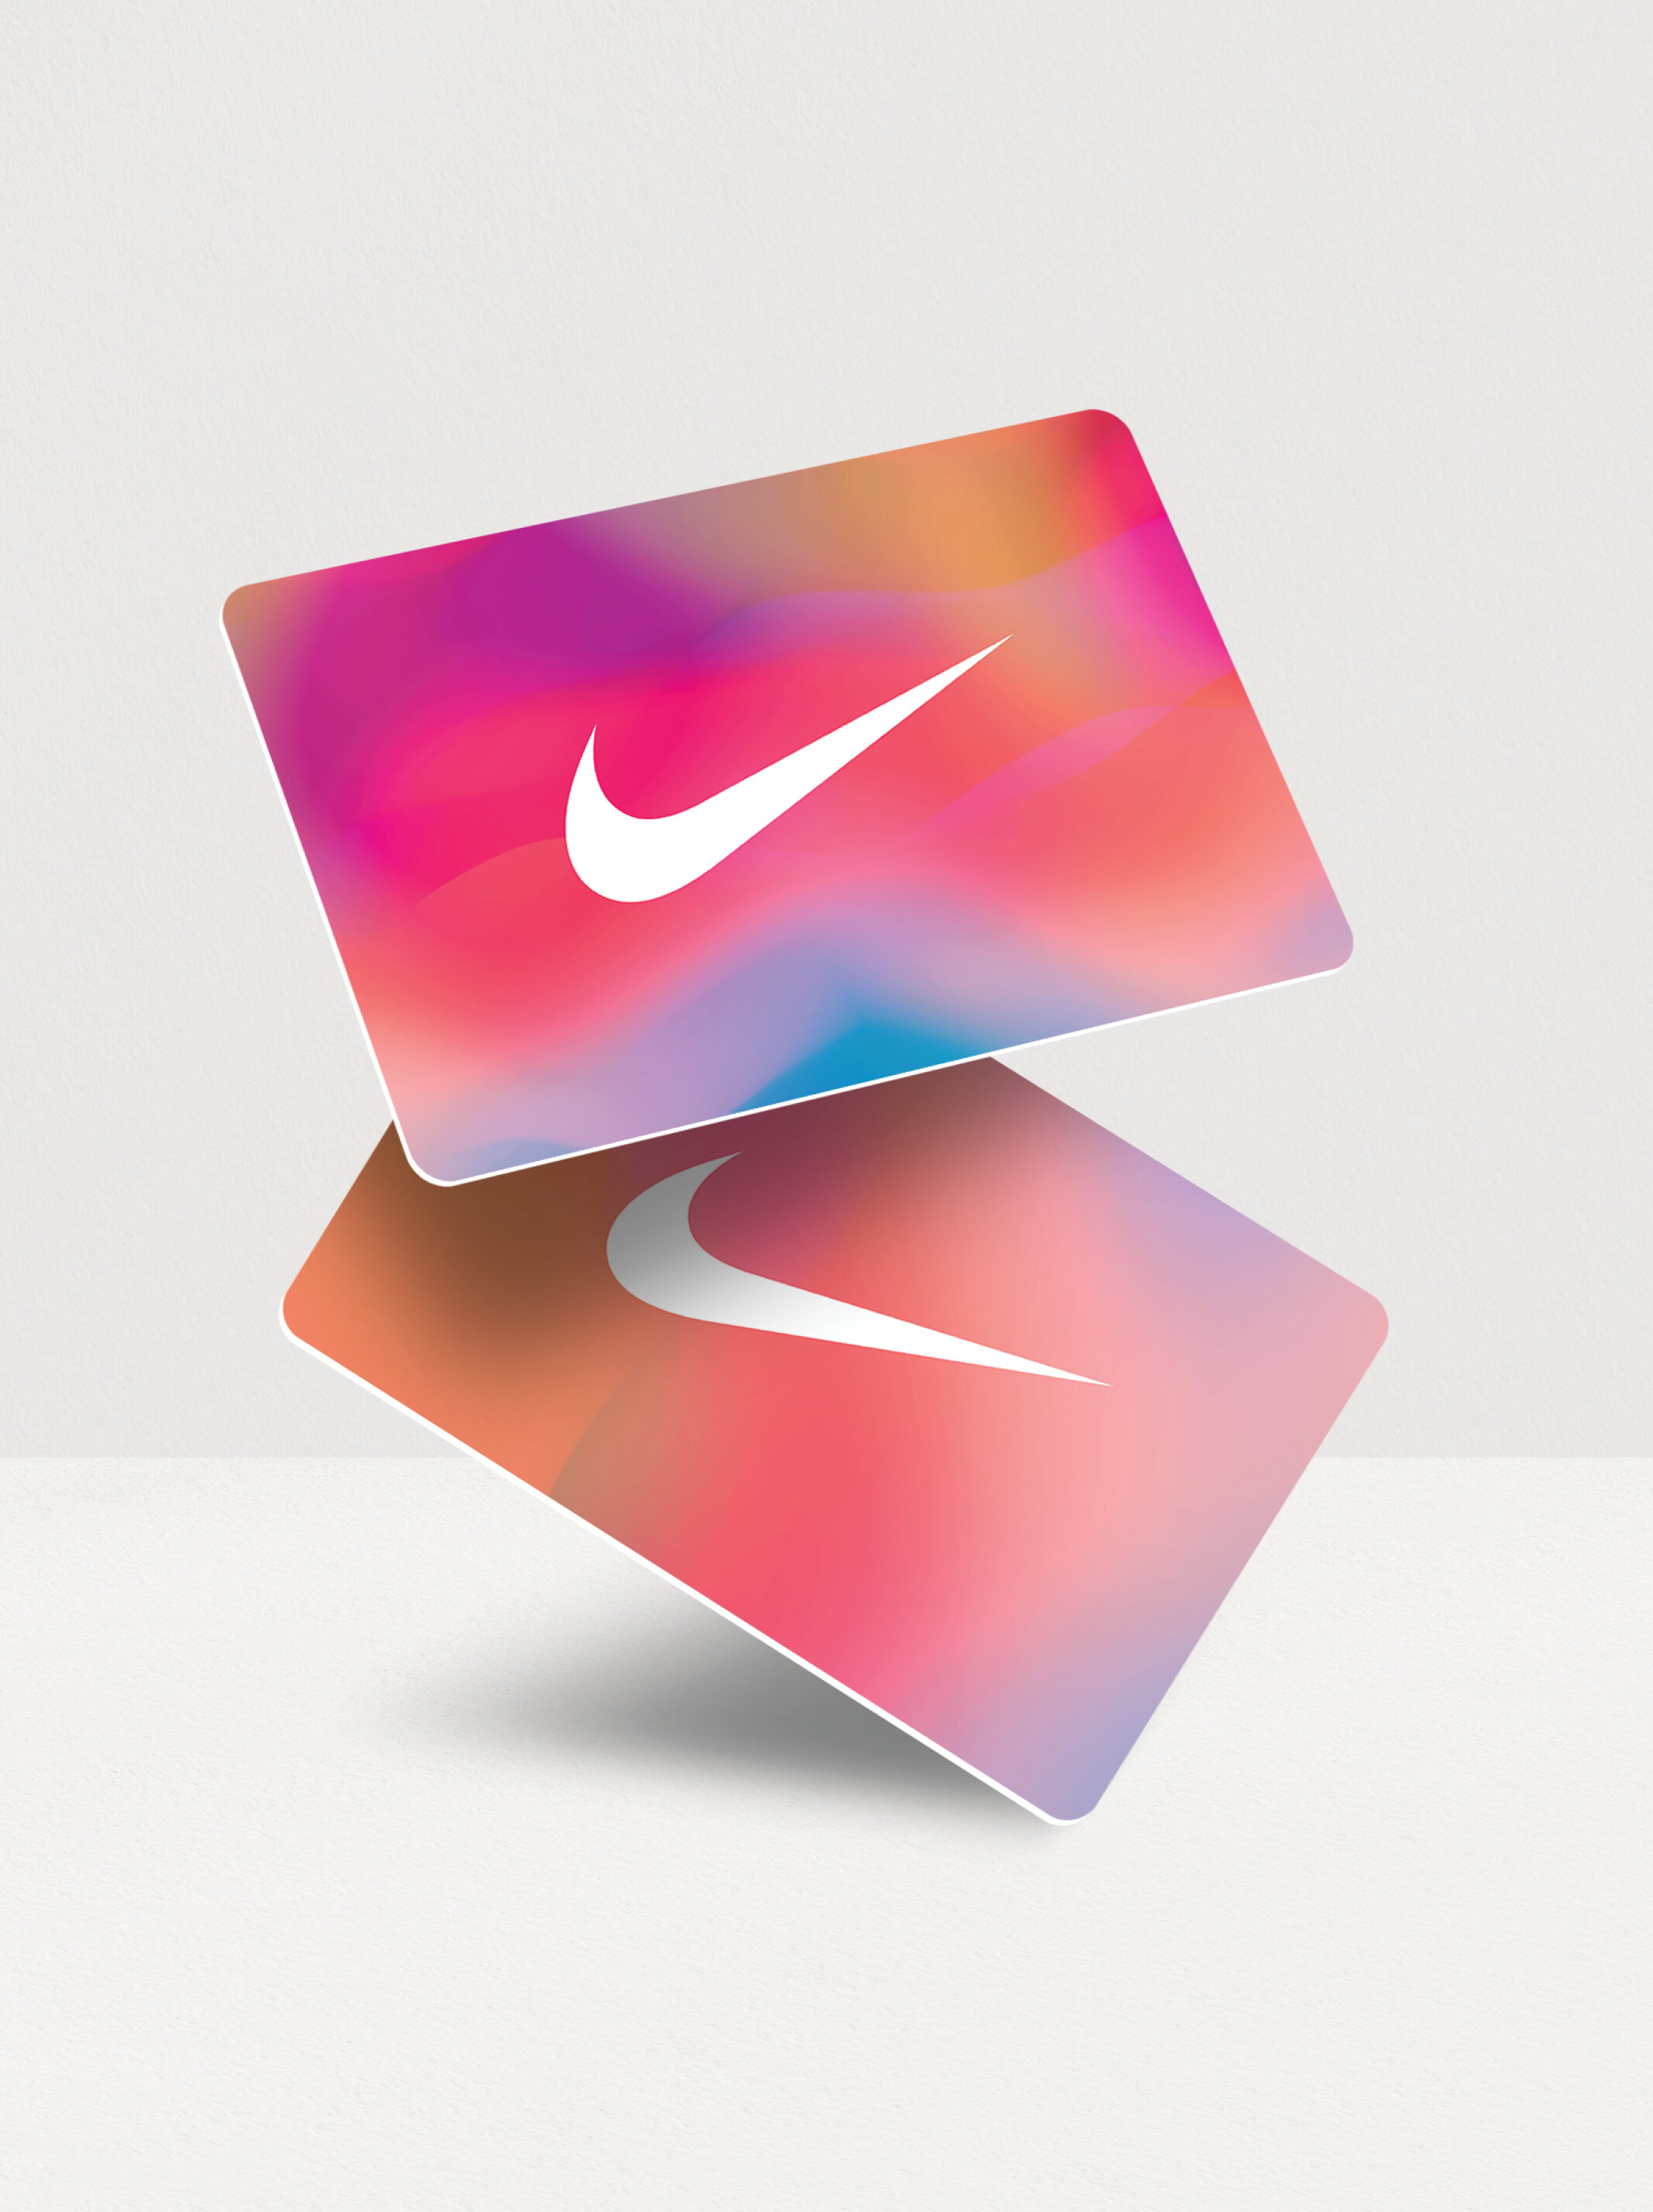 what stores accept nike gift cards